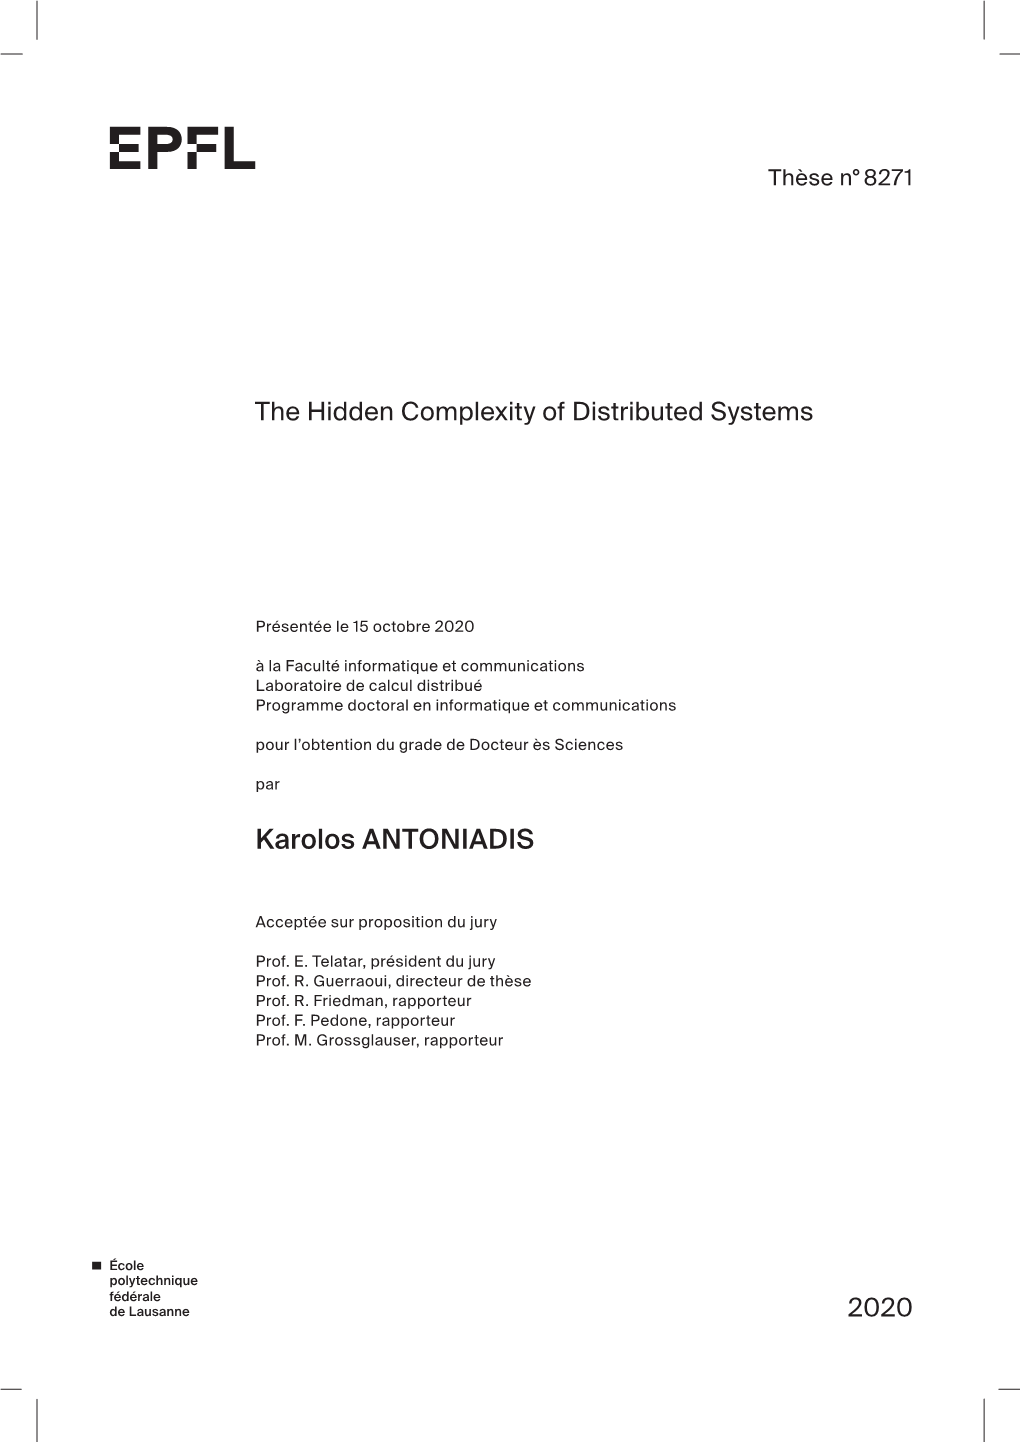 The Hidden Complexity of Distributed Systems